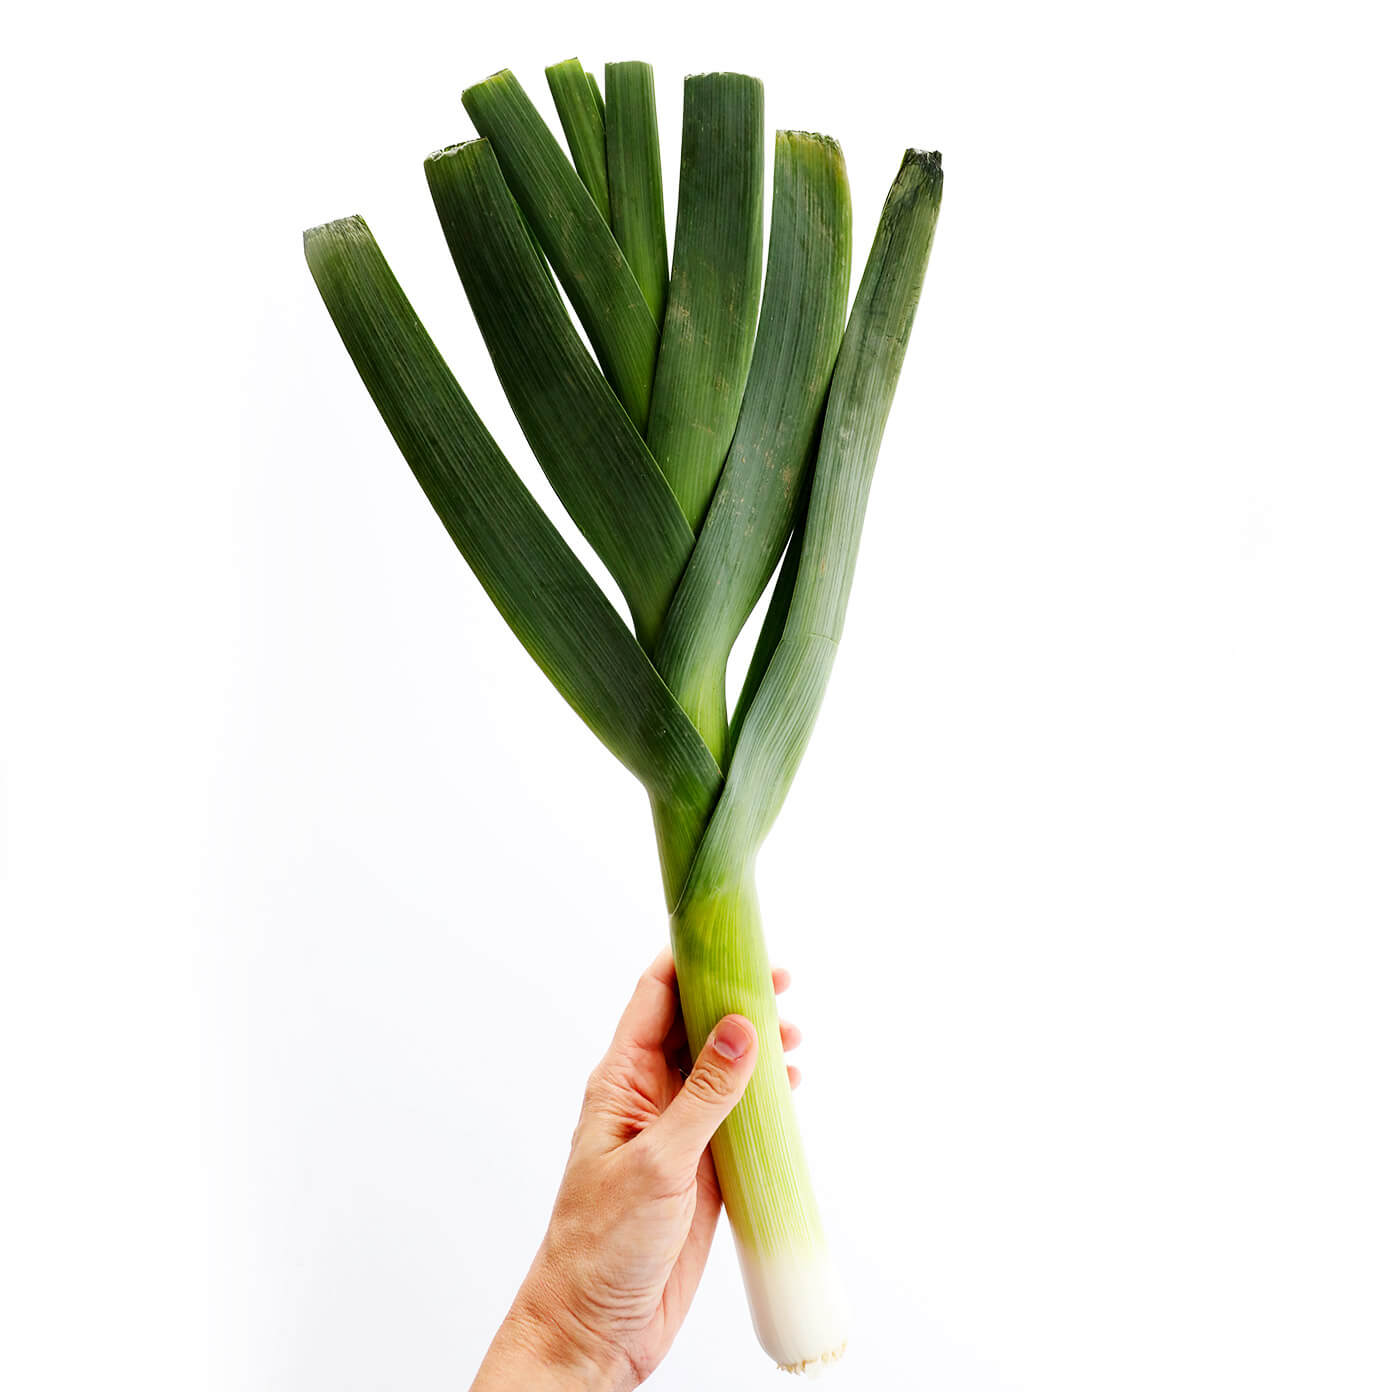 Sirfetch'd Loves Britain's Big Leeks: 7 Cool Facts We Learned From